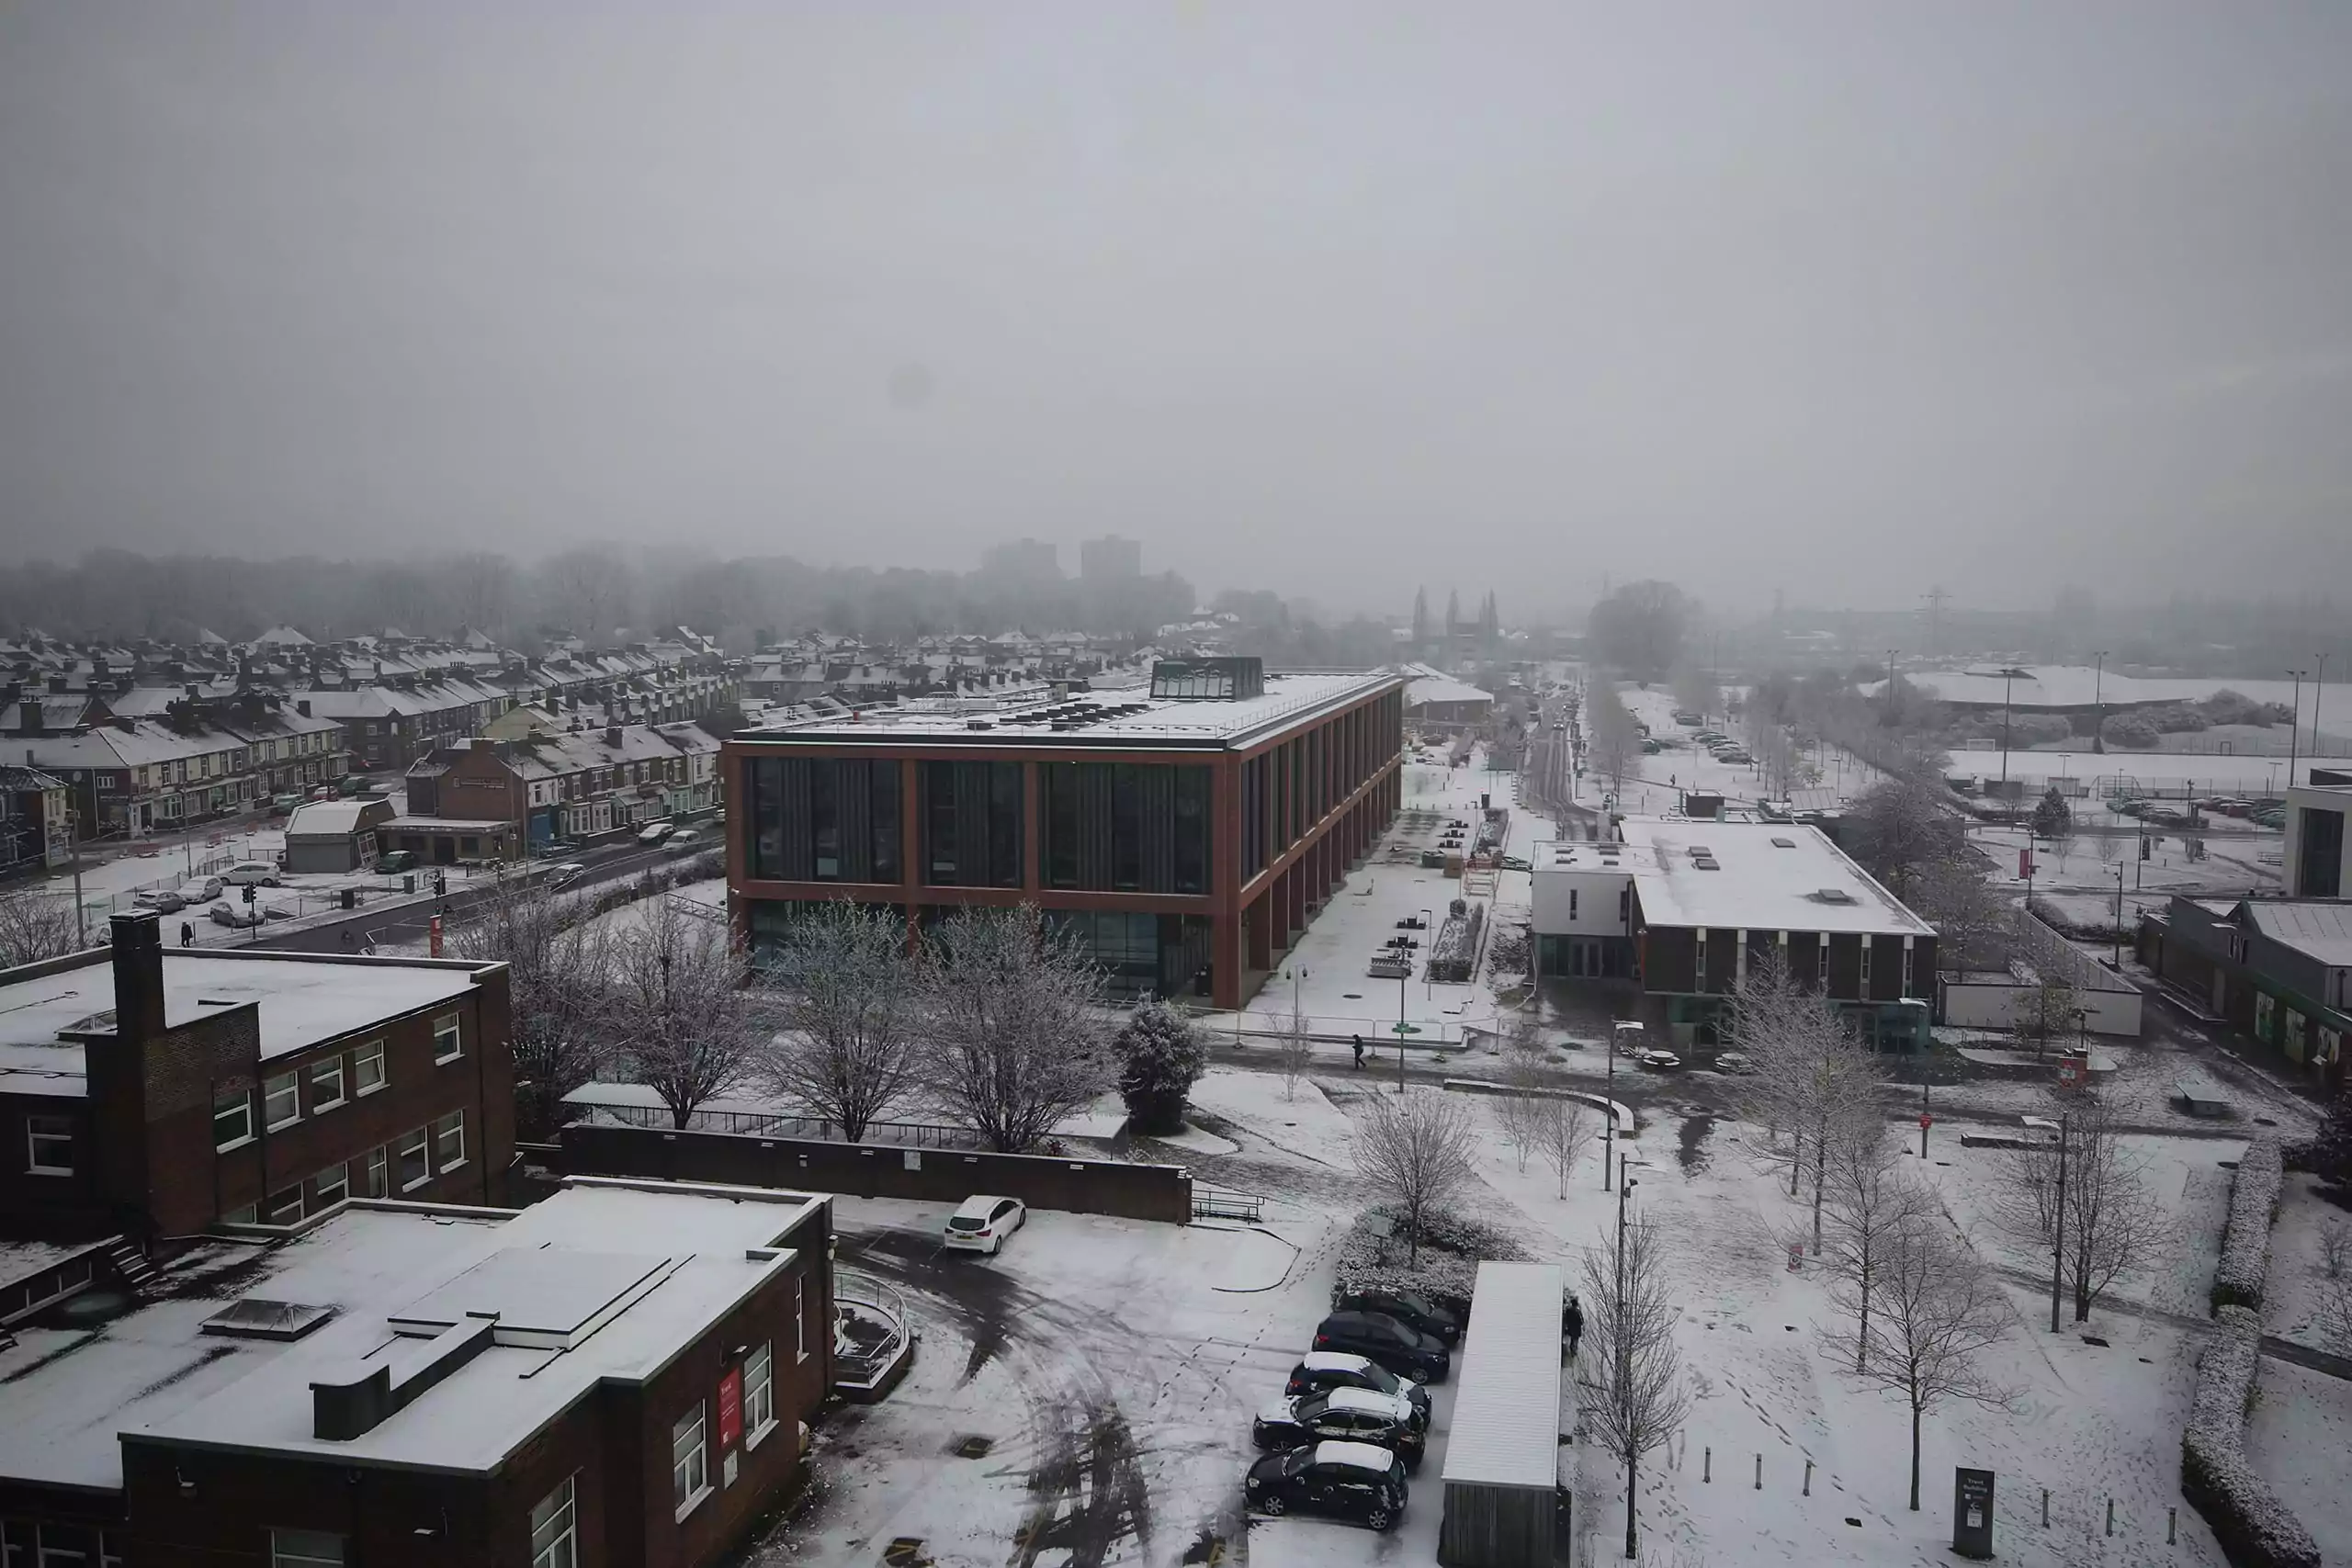 The Catalyst Building at Staffordshire University in the snow